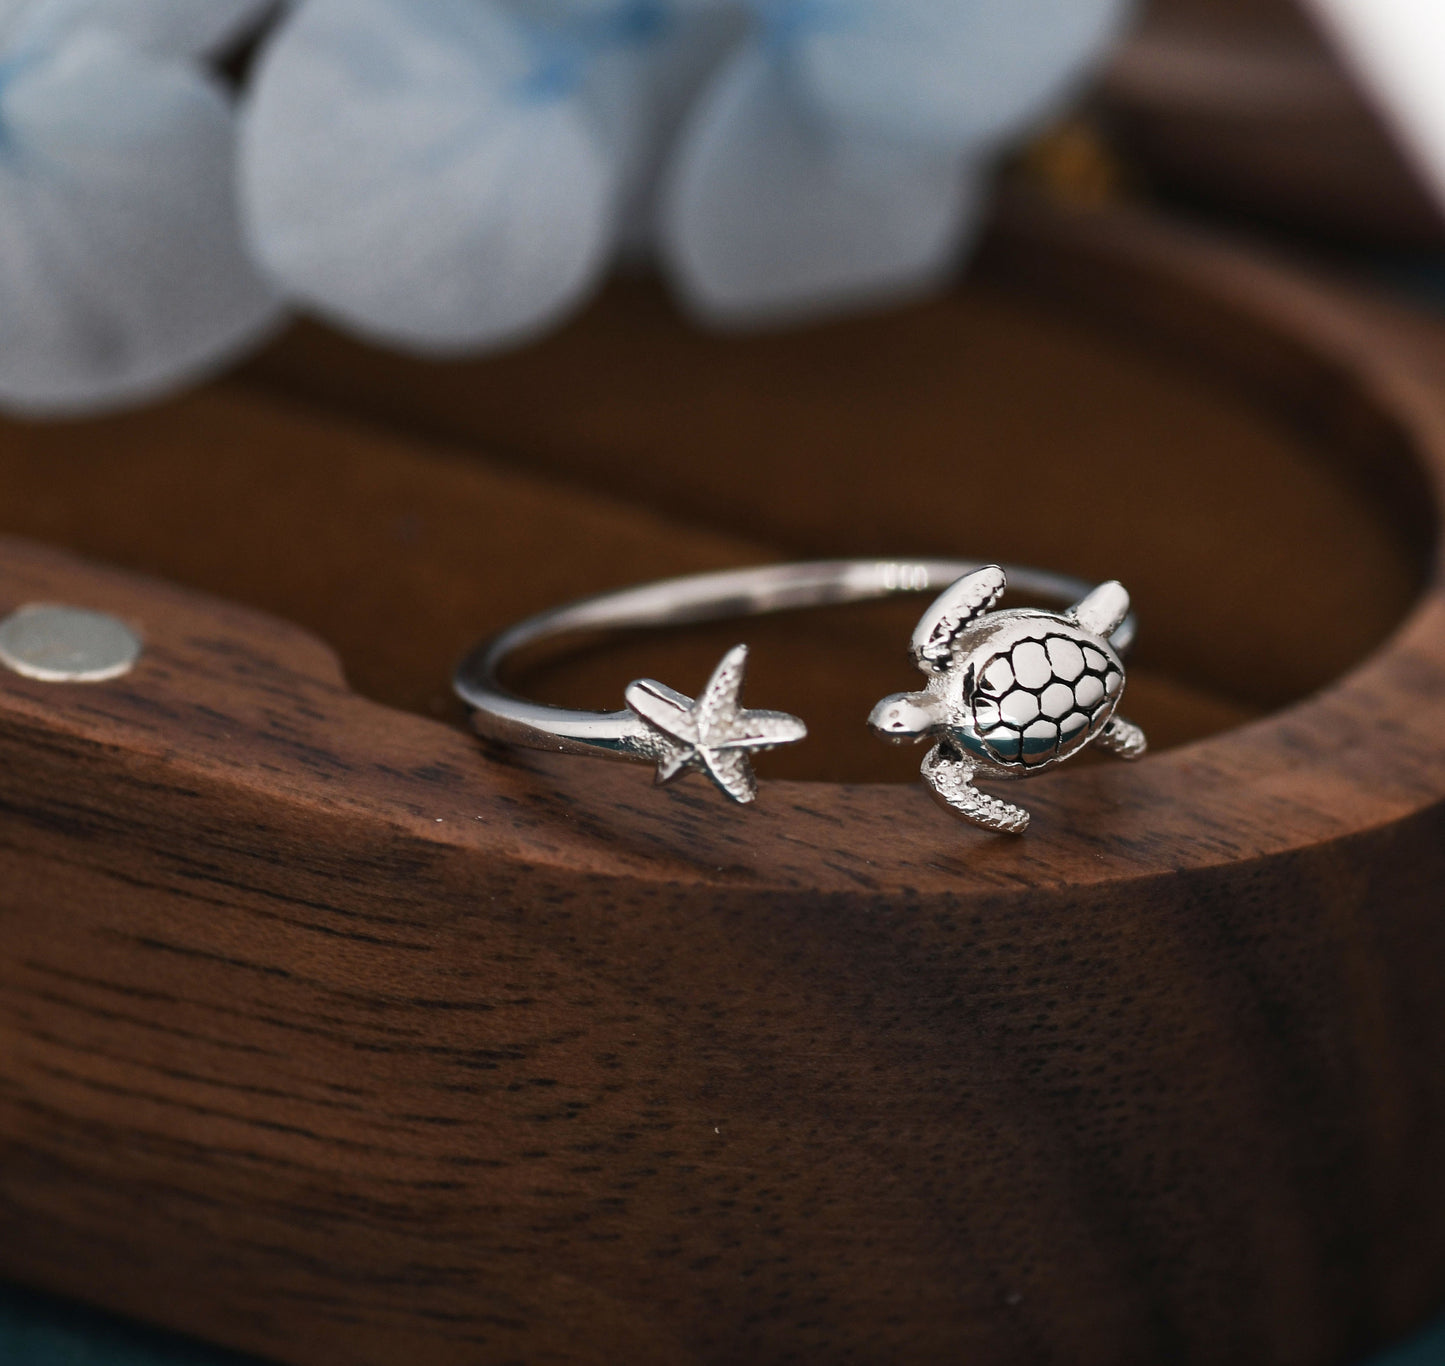 Turtle and Starfish Open Ring in Sterling Silver, Adjustable, Turtle Ring, Starfish Ring, Ocean Inspired, Nature Jewellery, Animal Ring